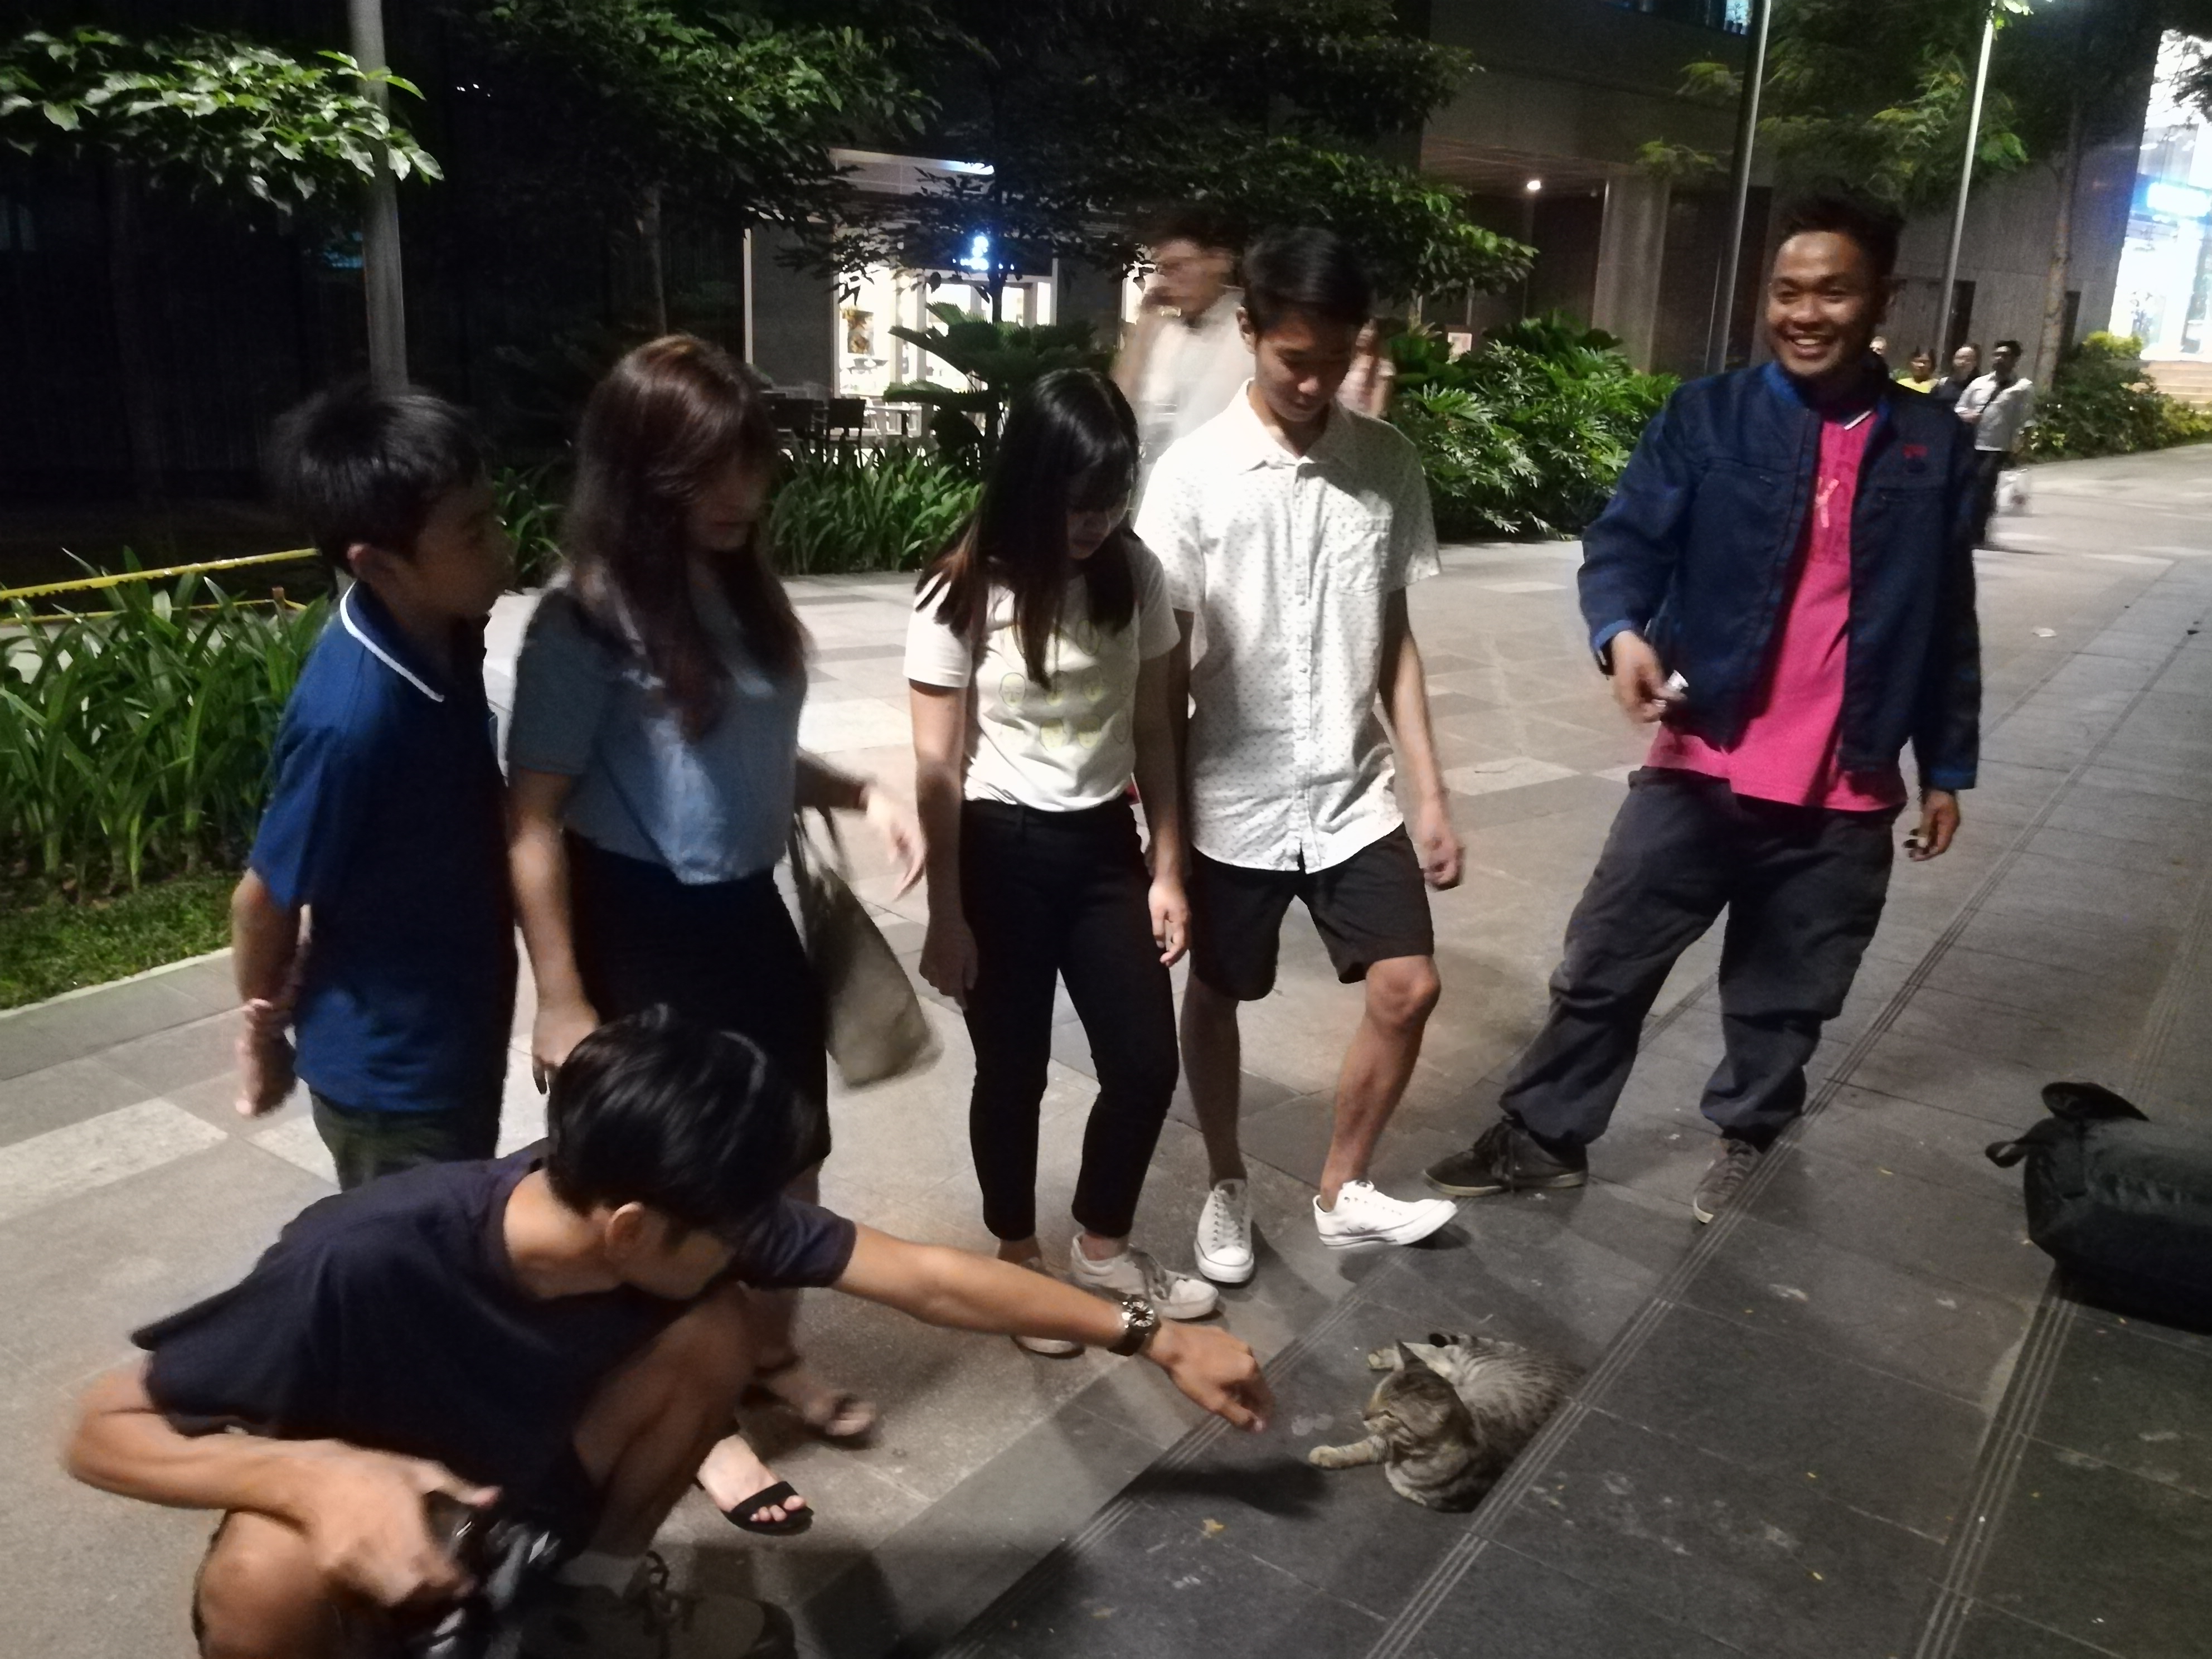 Mr. Ochi, the mystery man who has been feeding and taking care of the BGC cats